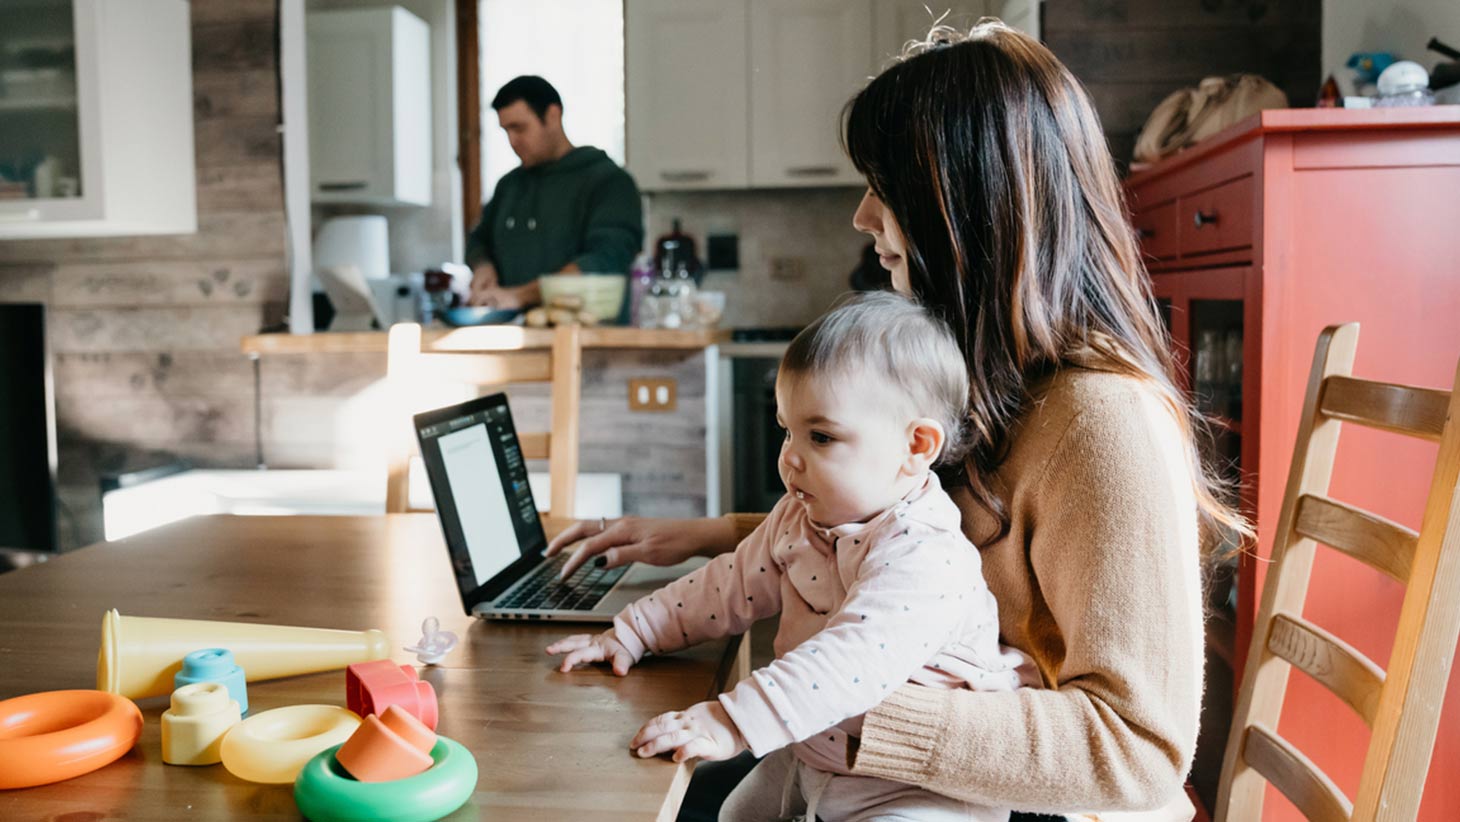 4 Ways for Stay-at-Home Parents to Make Money Without Leaving Home